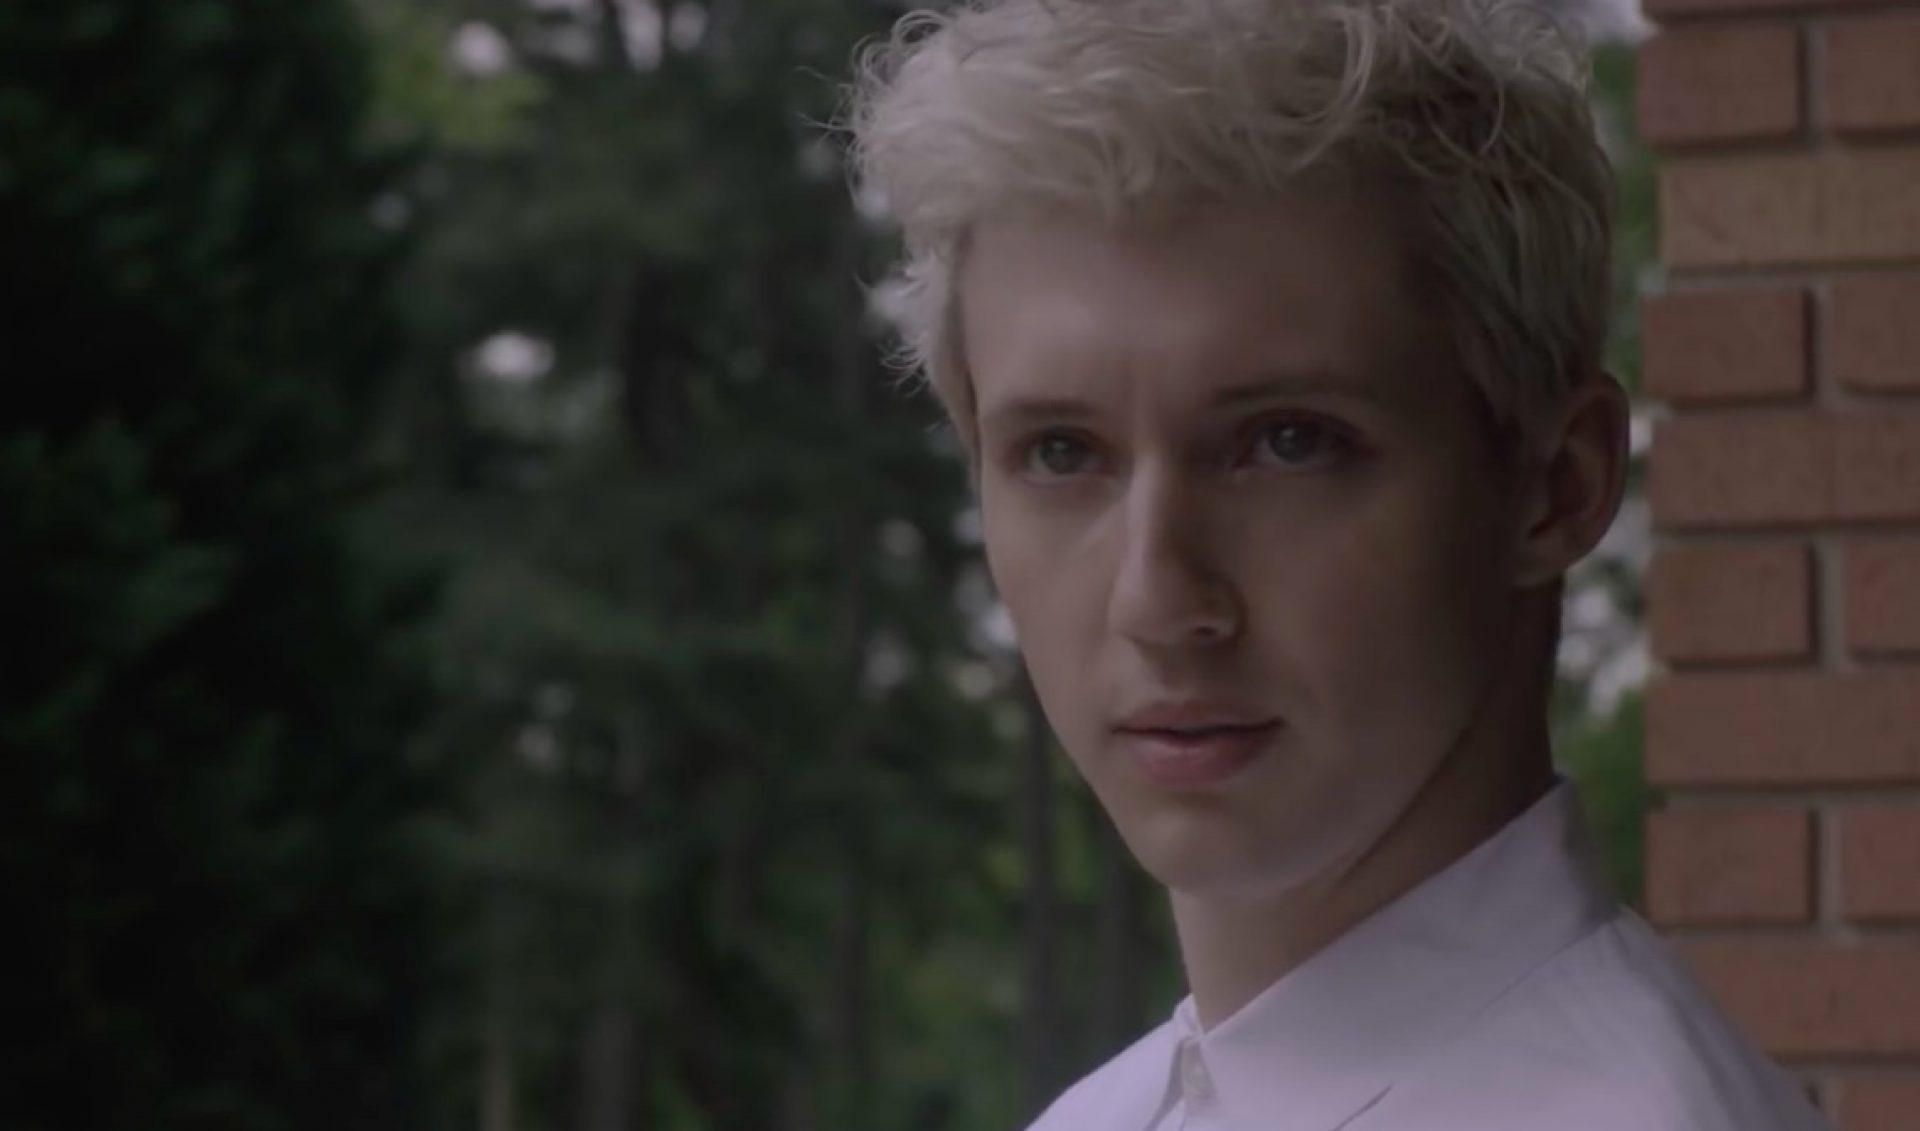 Watch Troye Sivan In The First Trailer For His Upcoming Feature ‘Boy Erased’